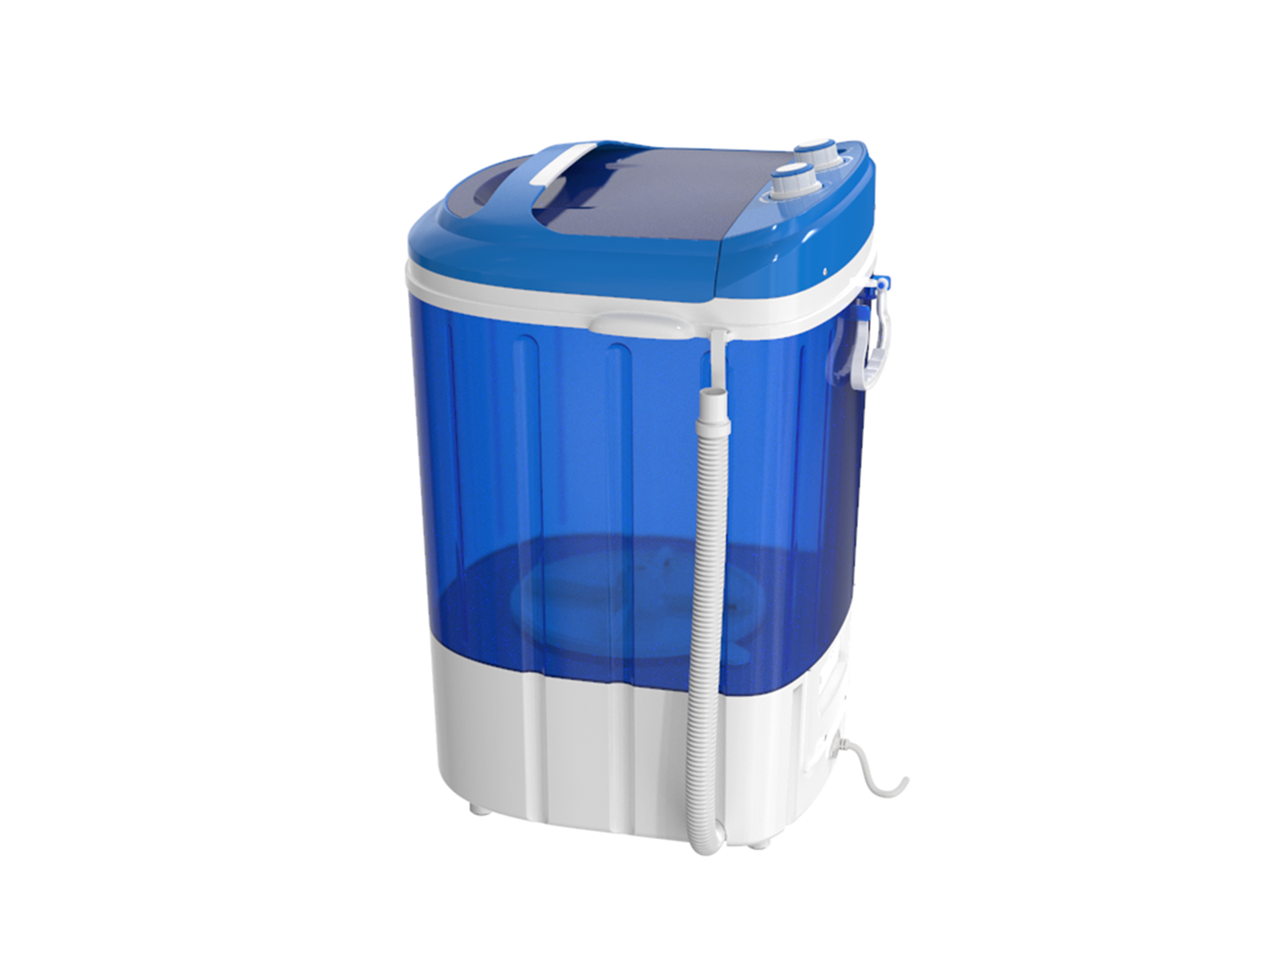 HomGarden 6.6lbs Capacity Portable Mini Washing Machine, Top-Load Washer  Spin Cycle Basket, Blue 